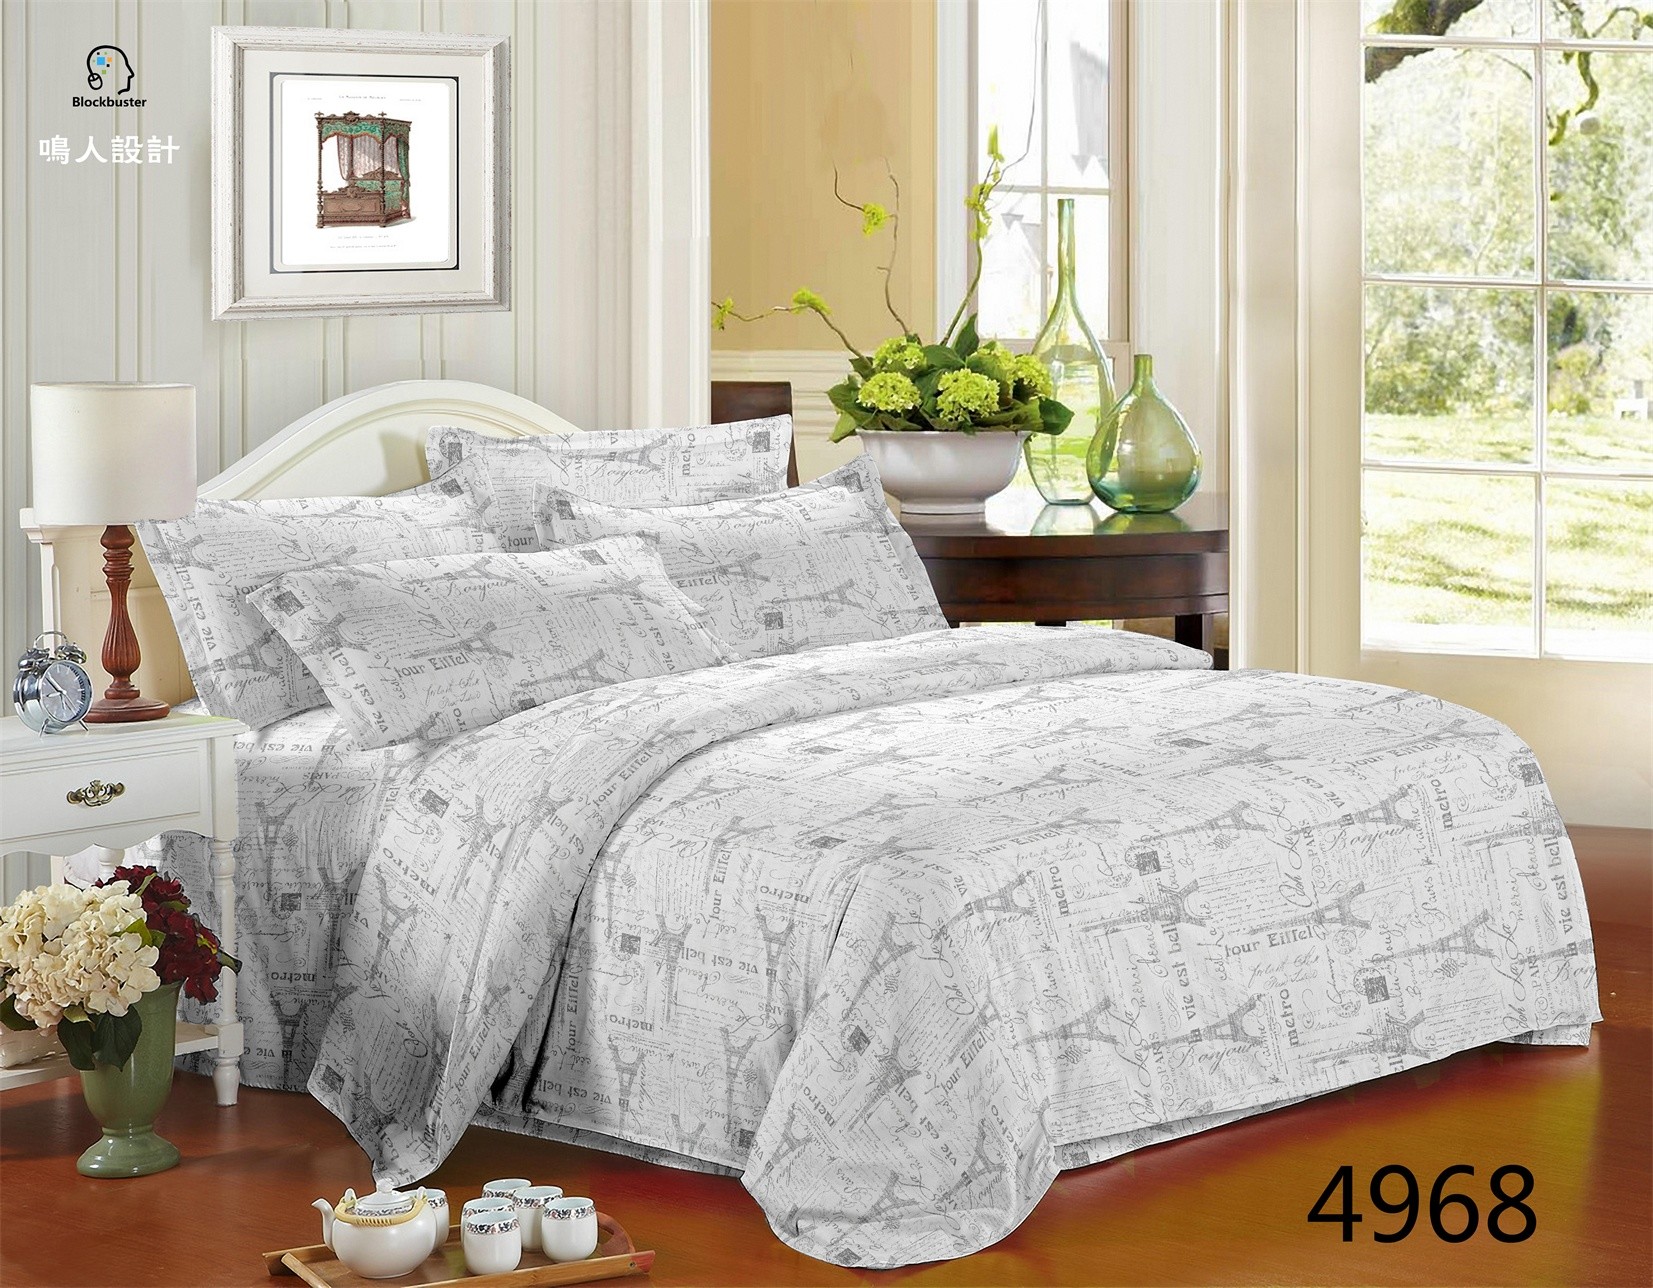 Best Home Bed Quilts Double Size Good Pigment Printed Comforter Set wholesale